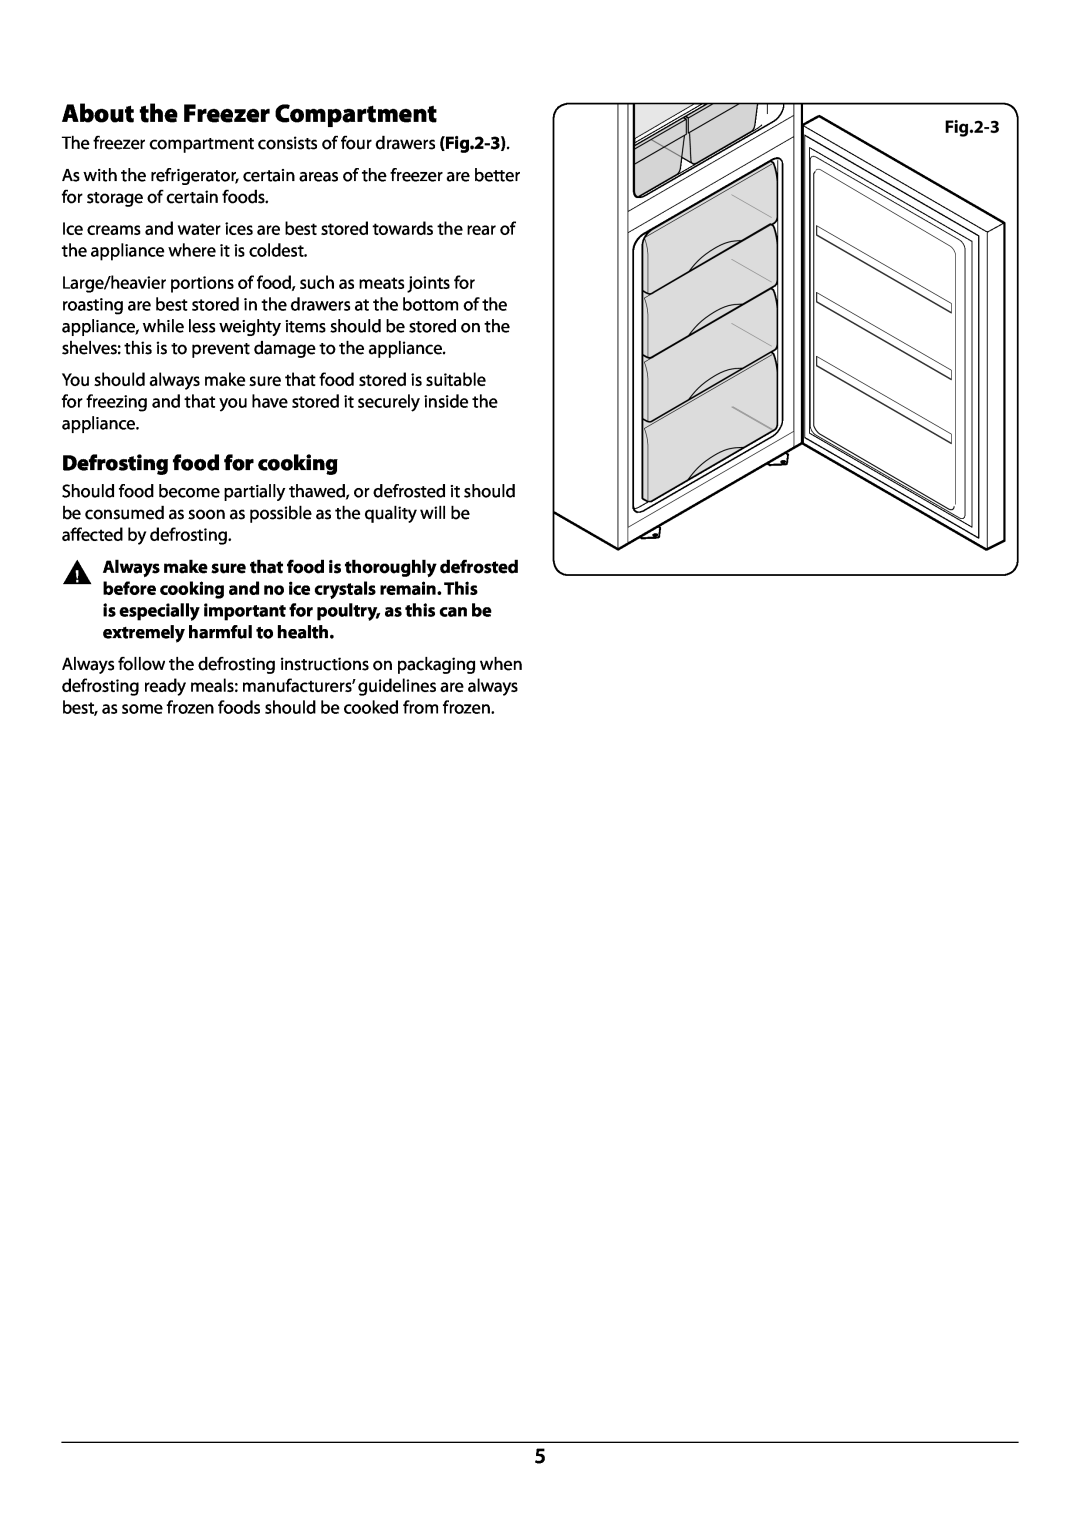 Rangemaster U110121 - 01A manual about the Freezer compartment, Defrosting food for cooking 